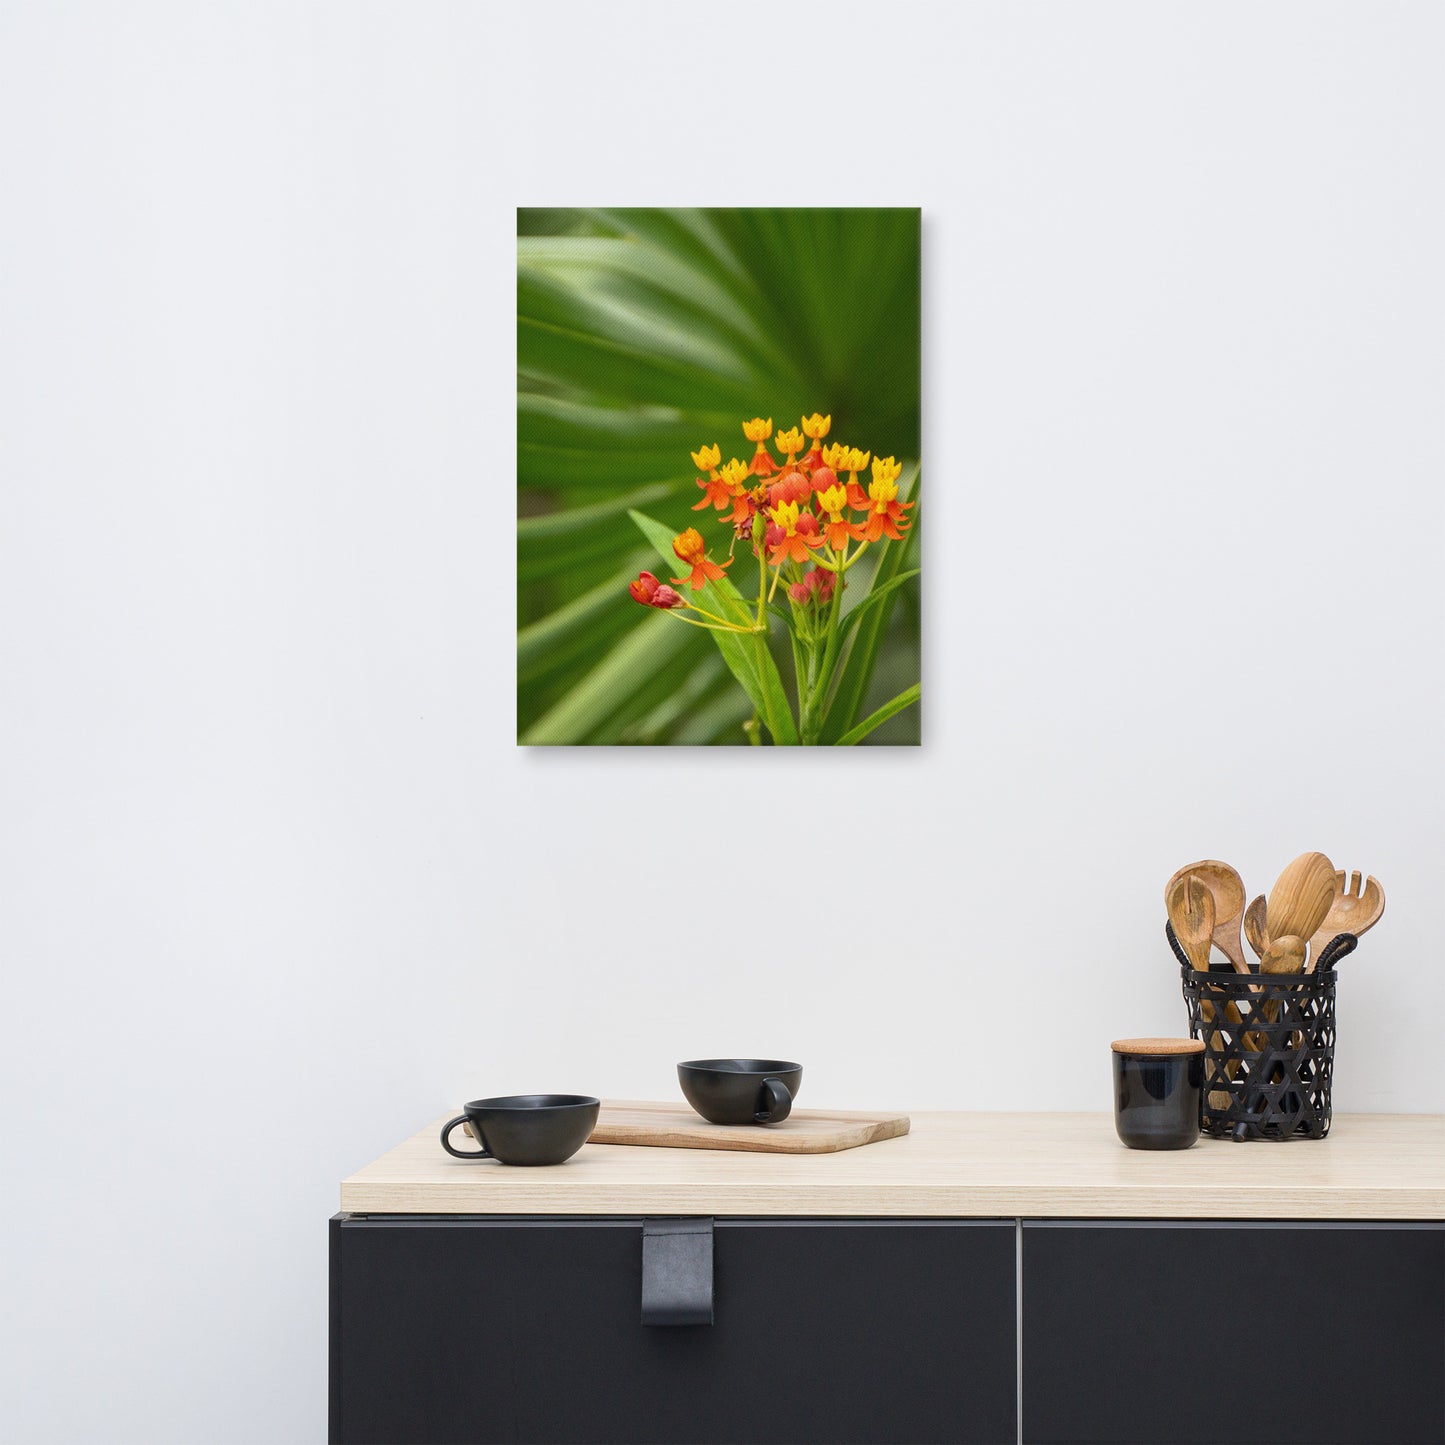 Bloodflowers and Palm Color Floral Nature Canvas Wall Art Prints